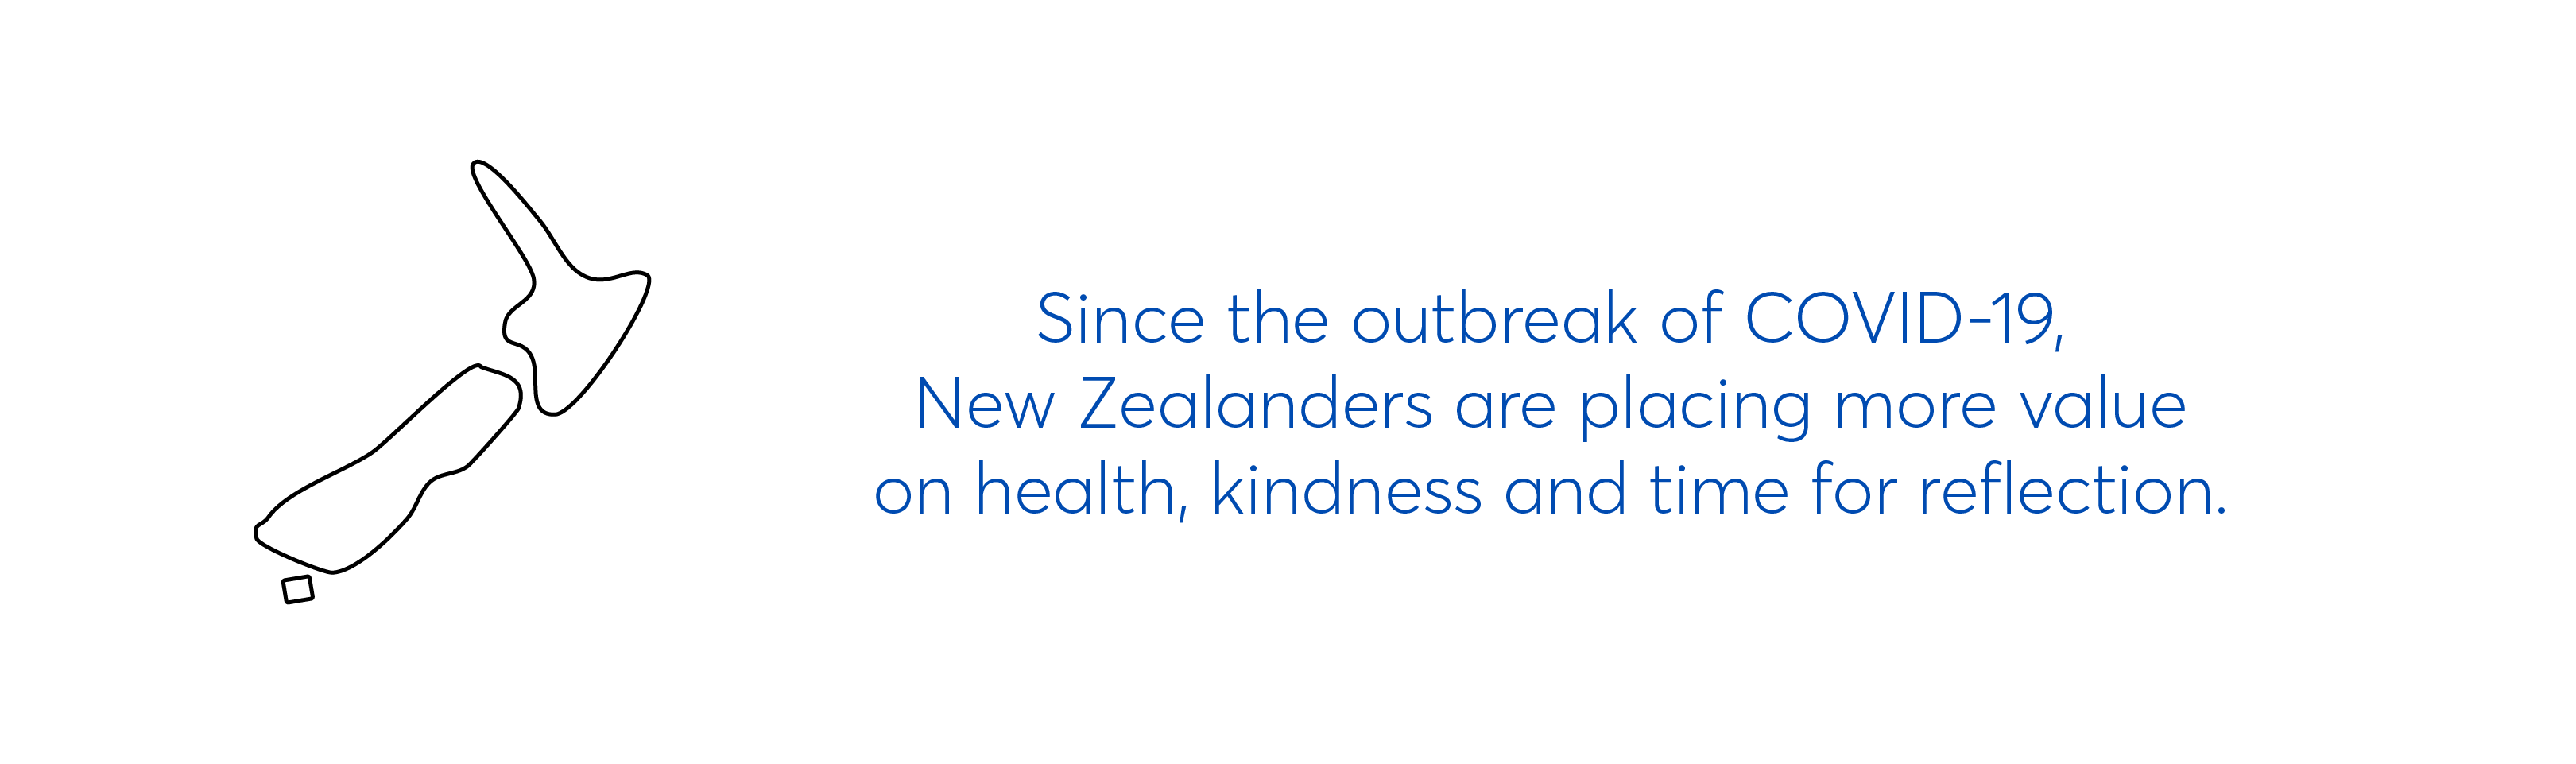 New Zealanders are placing more importance on health, kindess and reflection